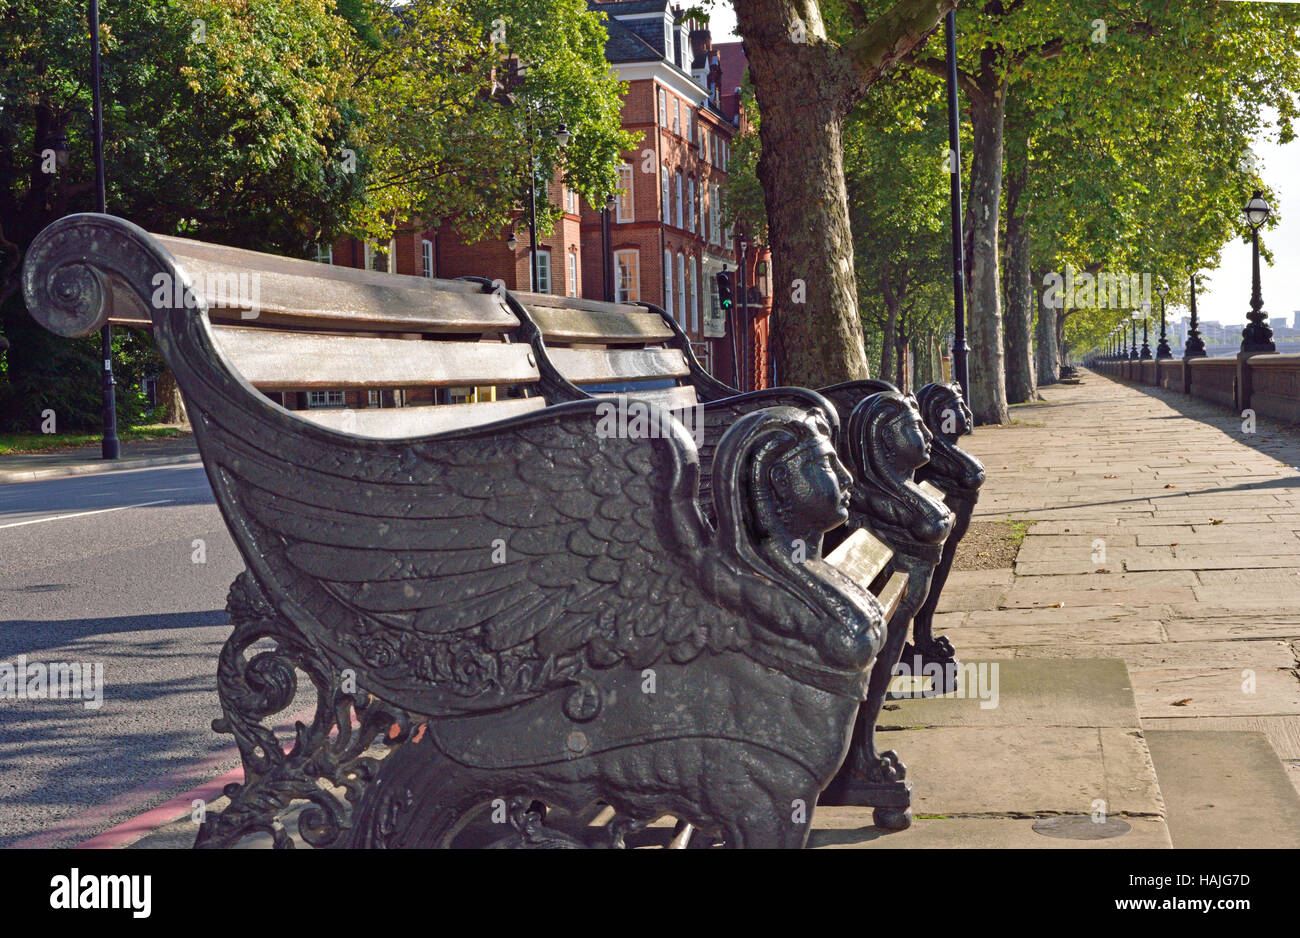 Pharonic Egyptian style bench in London with the Thames Embankment stretching out in the background. Stock Photo